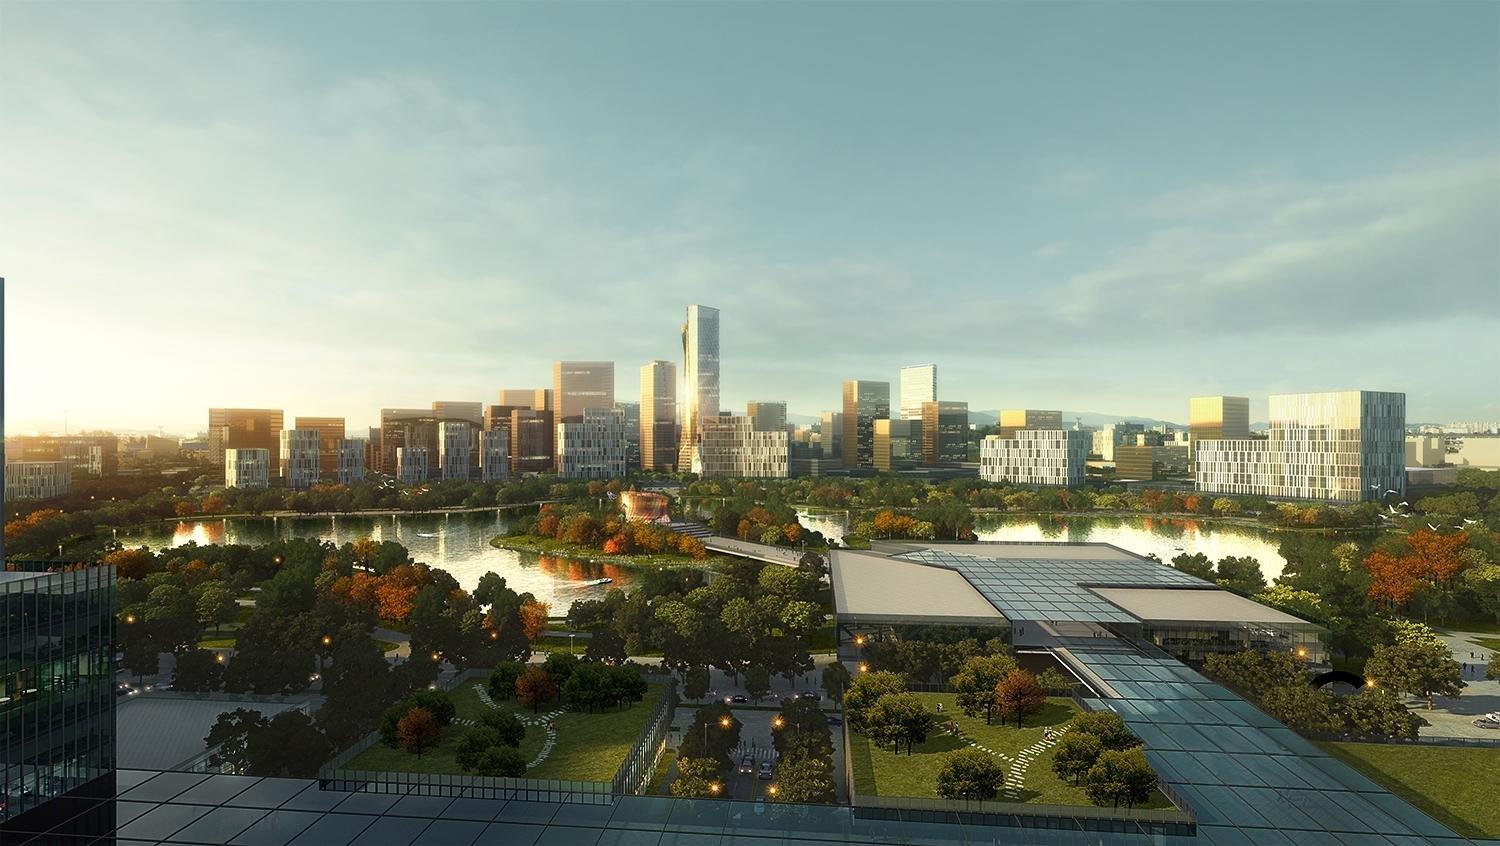 A rendering of New Clark, a planned city for the Philippines.